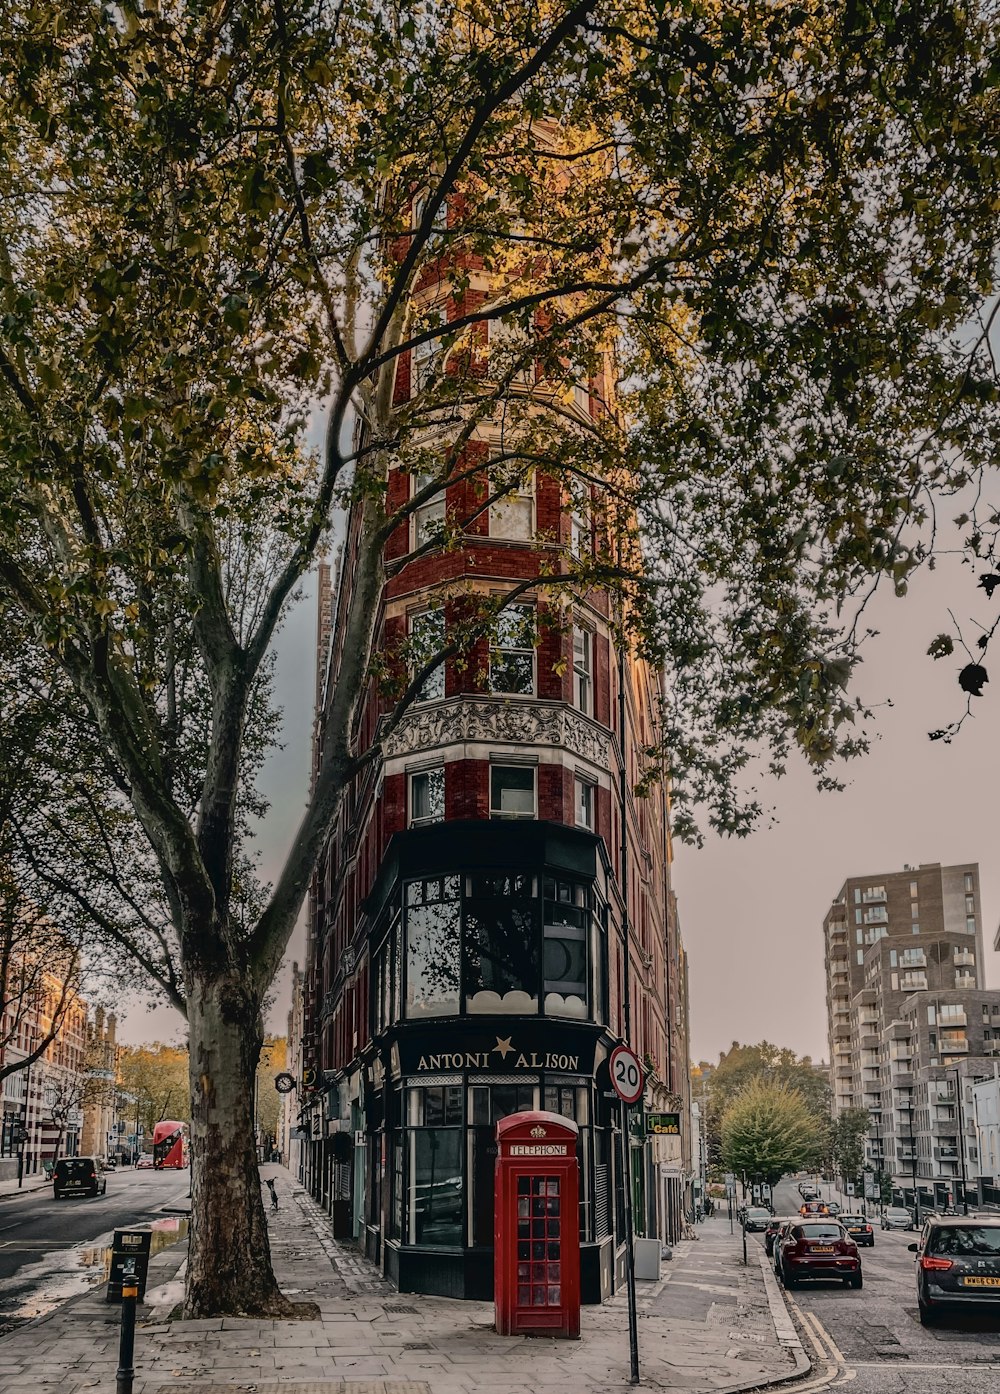 a red phone booth sitting on the side of a street